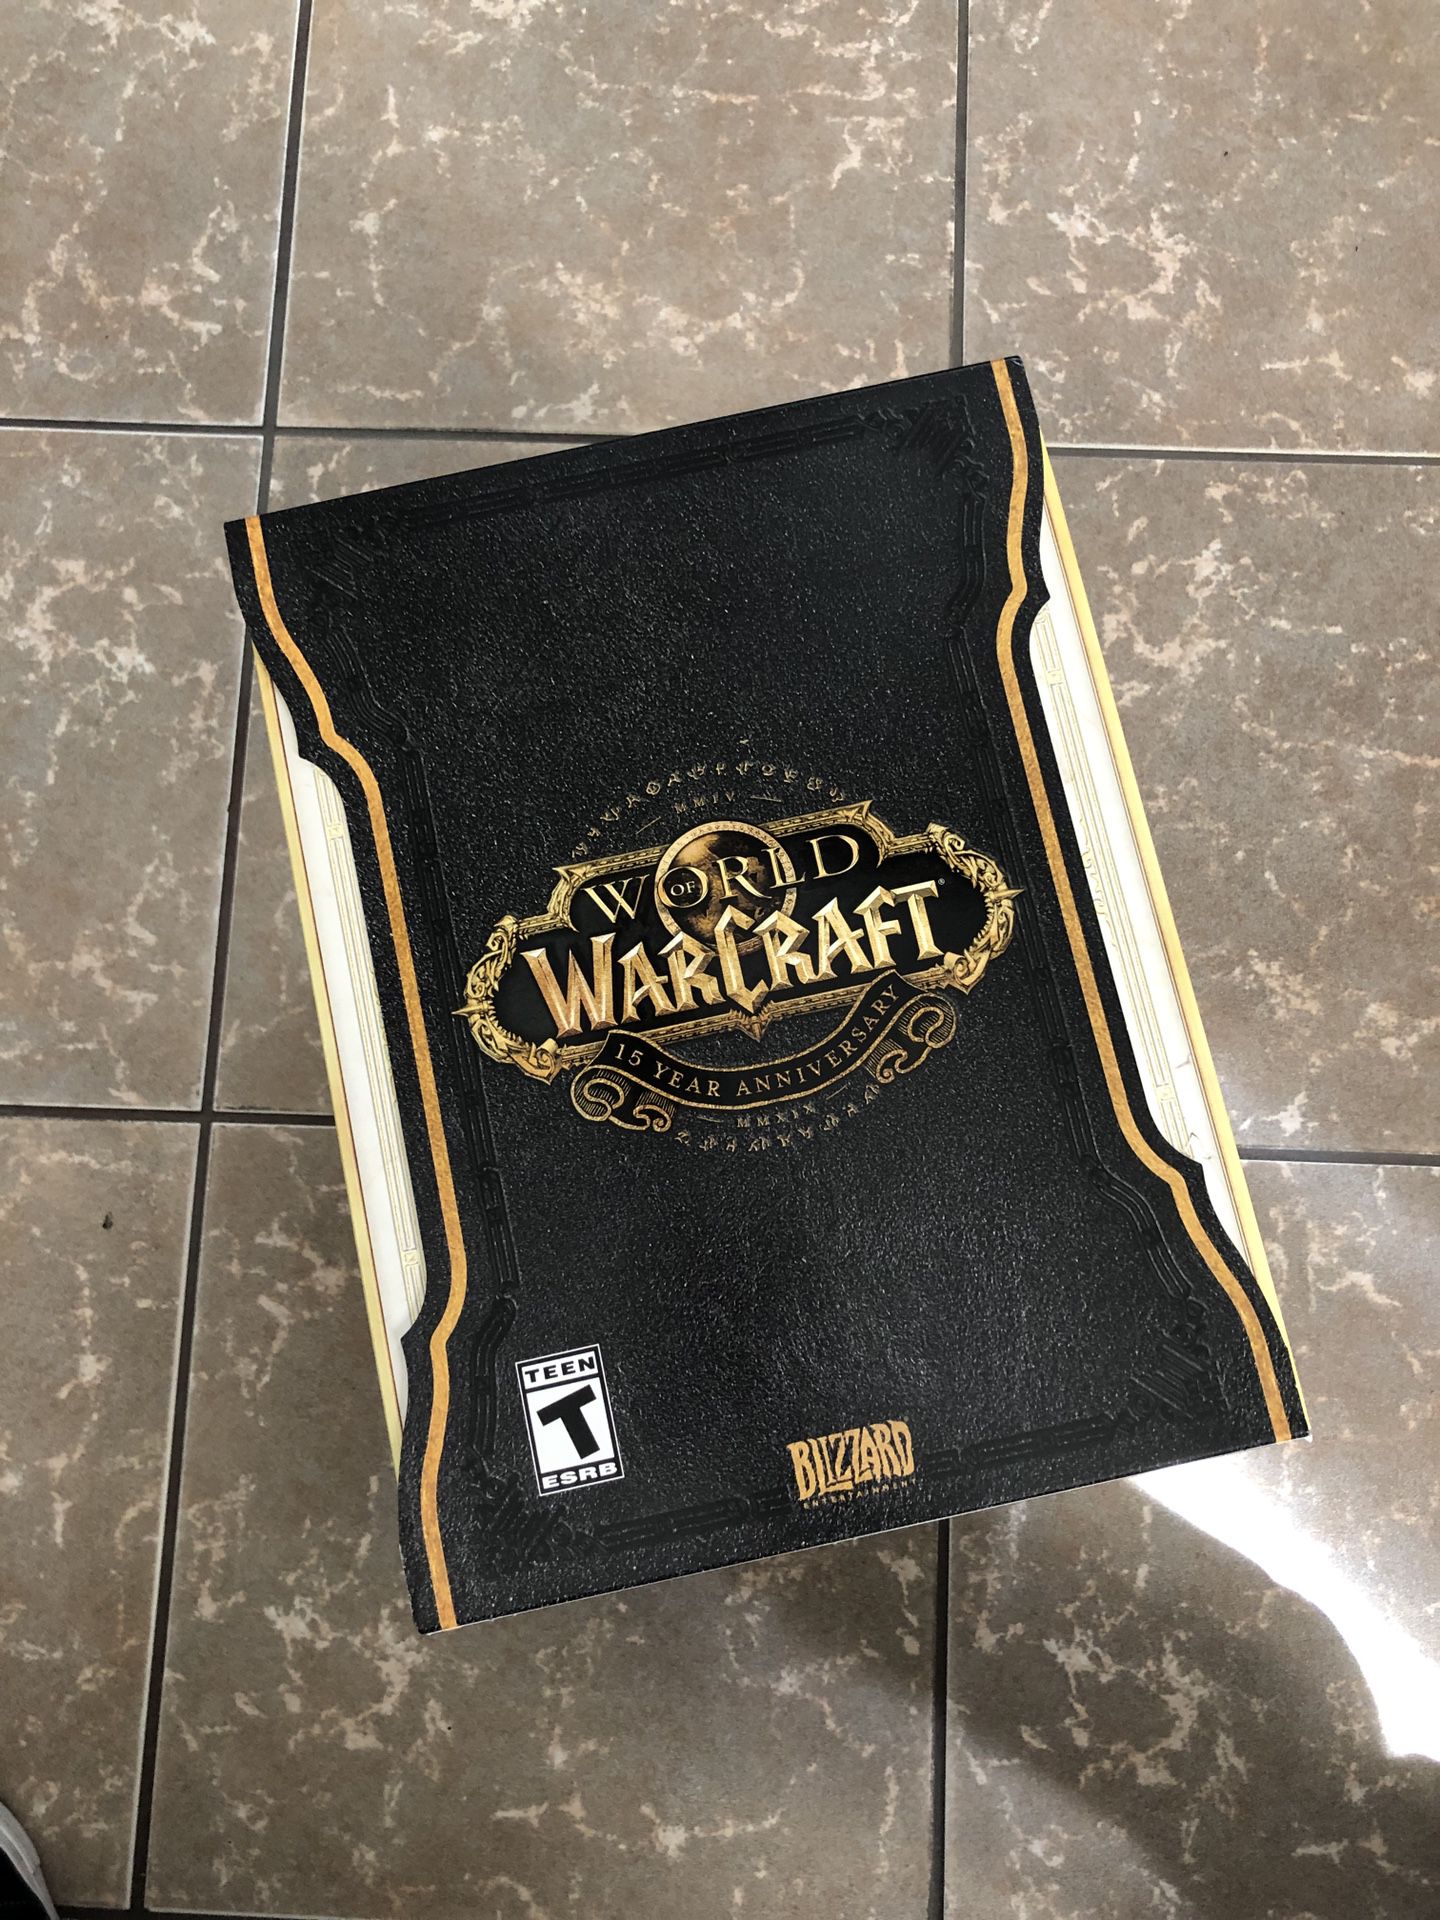 World of Warcraft collectors edition 15th